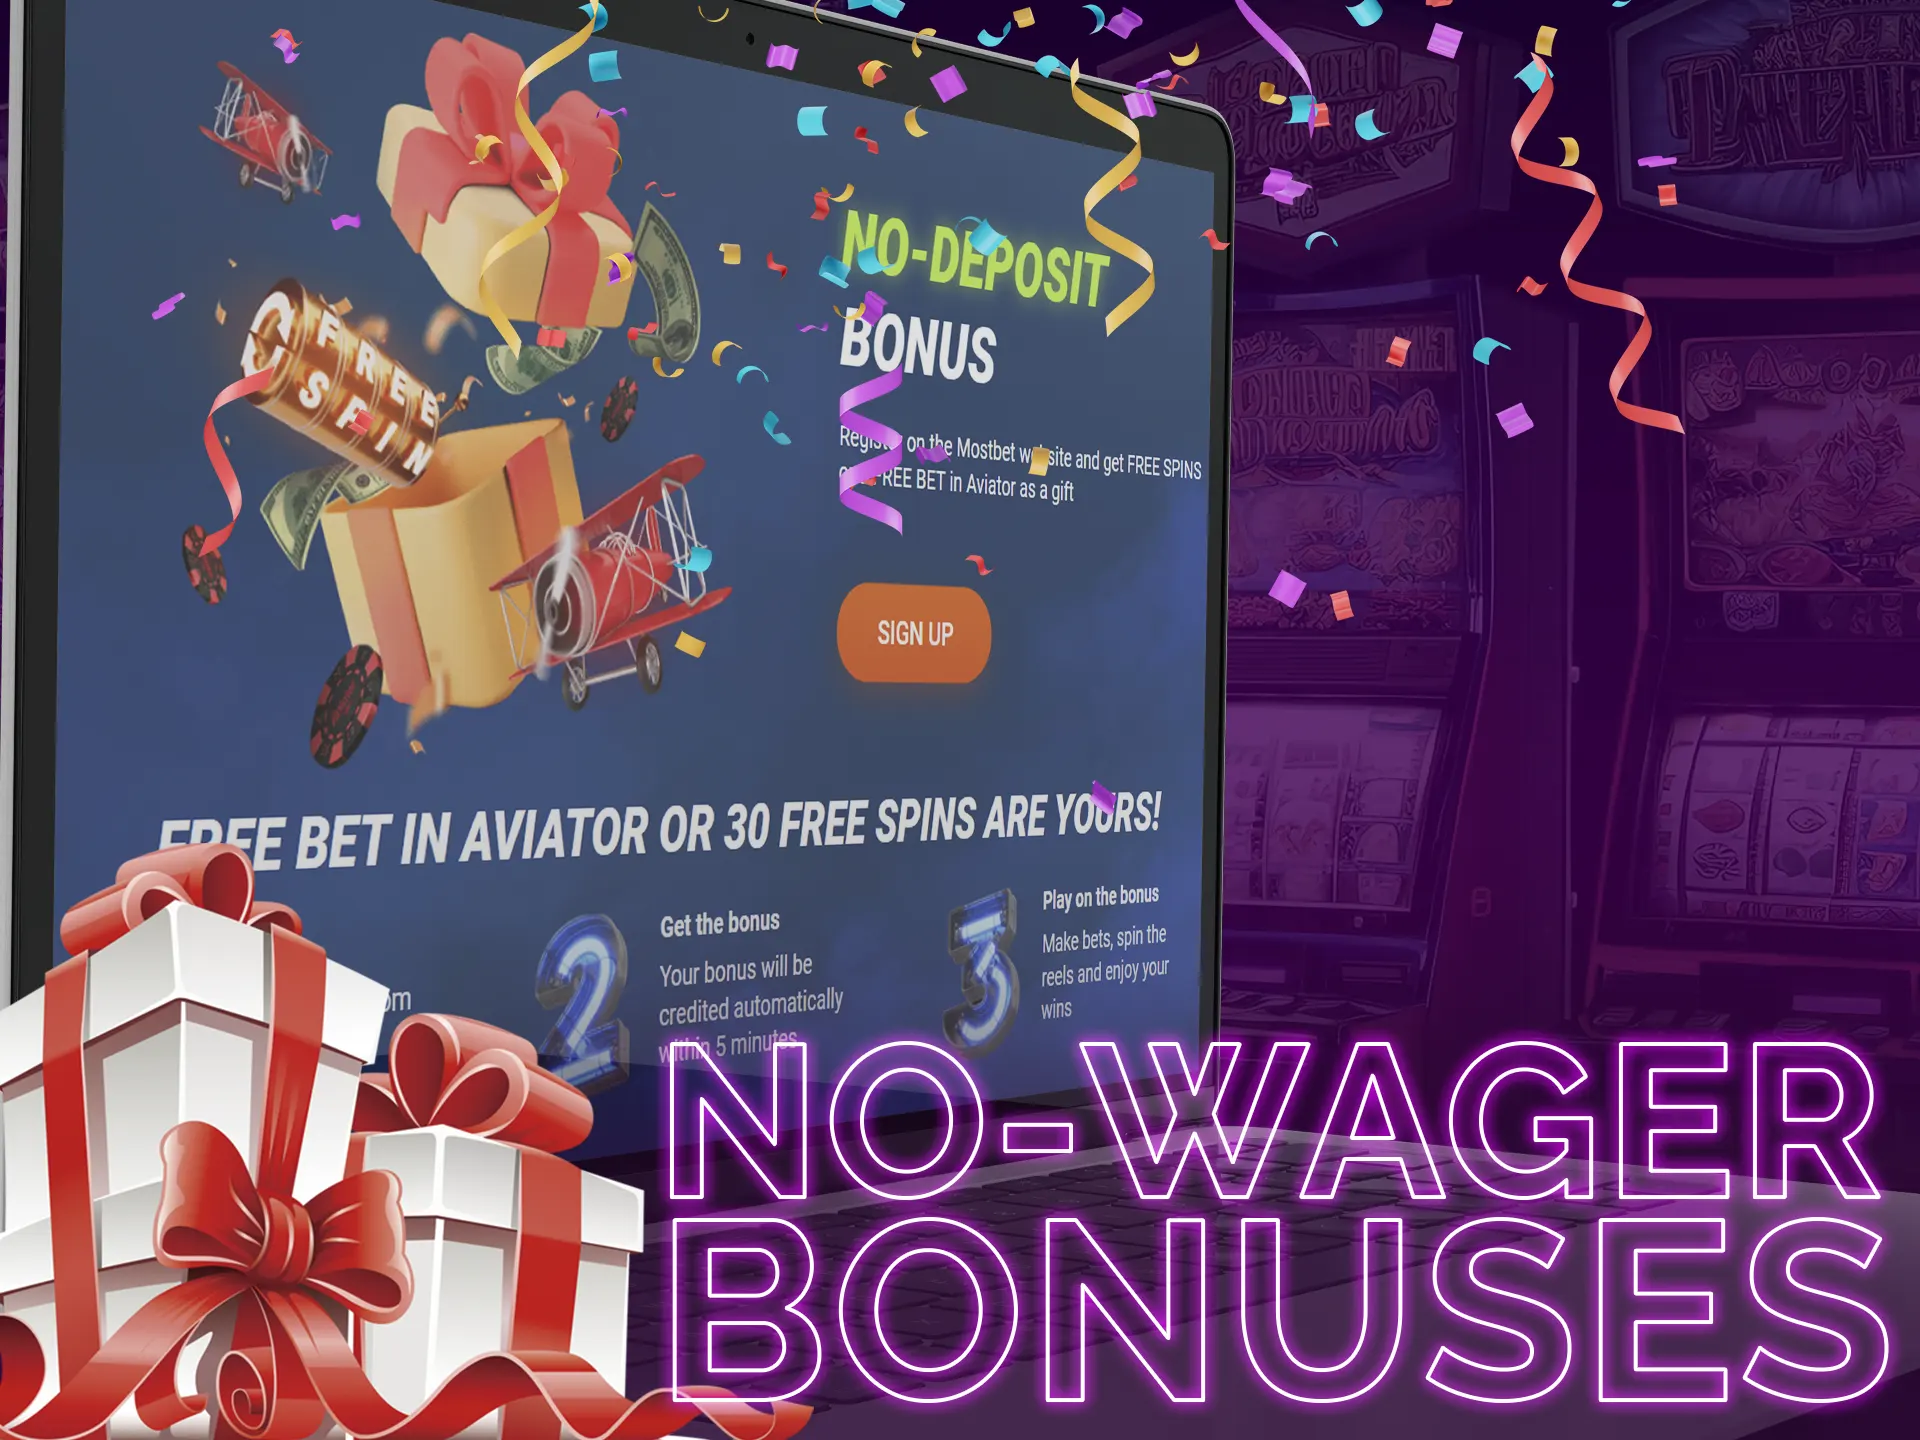 No wagering bonuses: keep your winnings hassle-free, ideal for players who prefer simplicity and transparency.